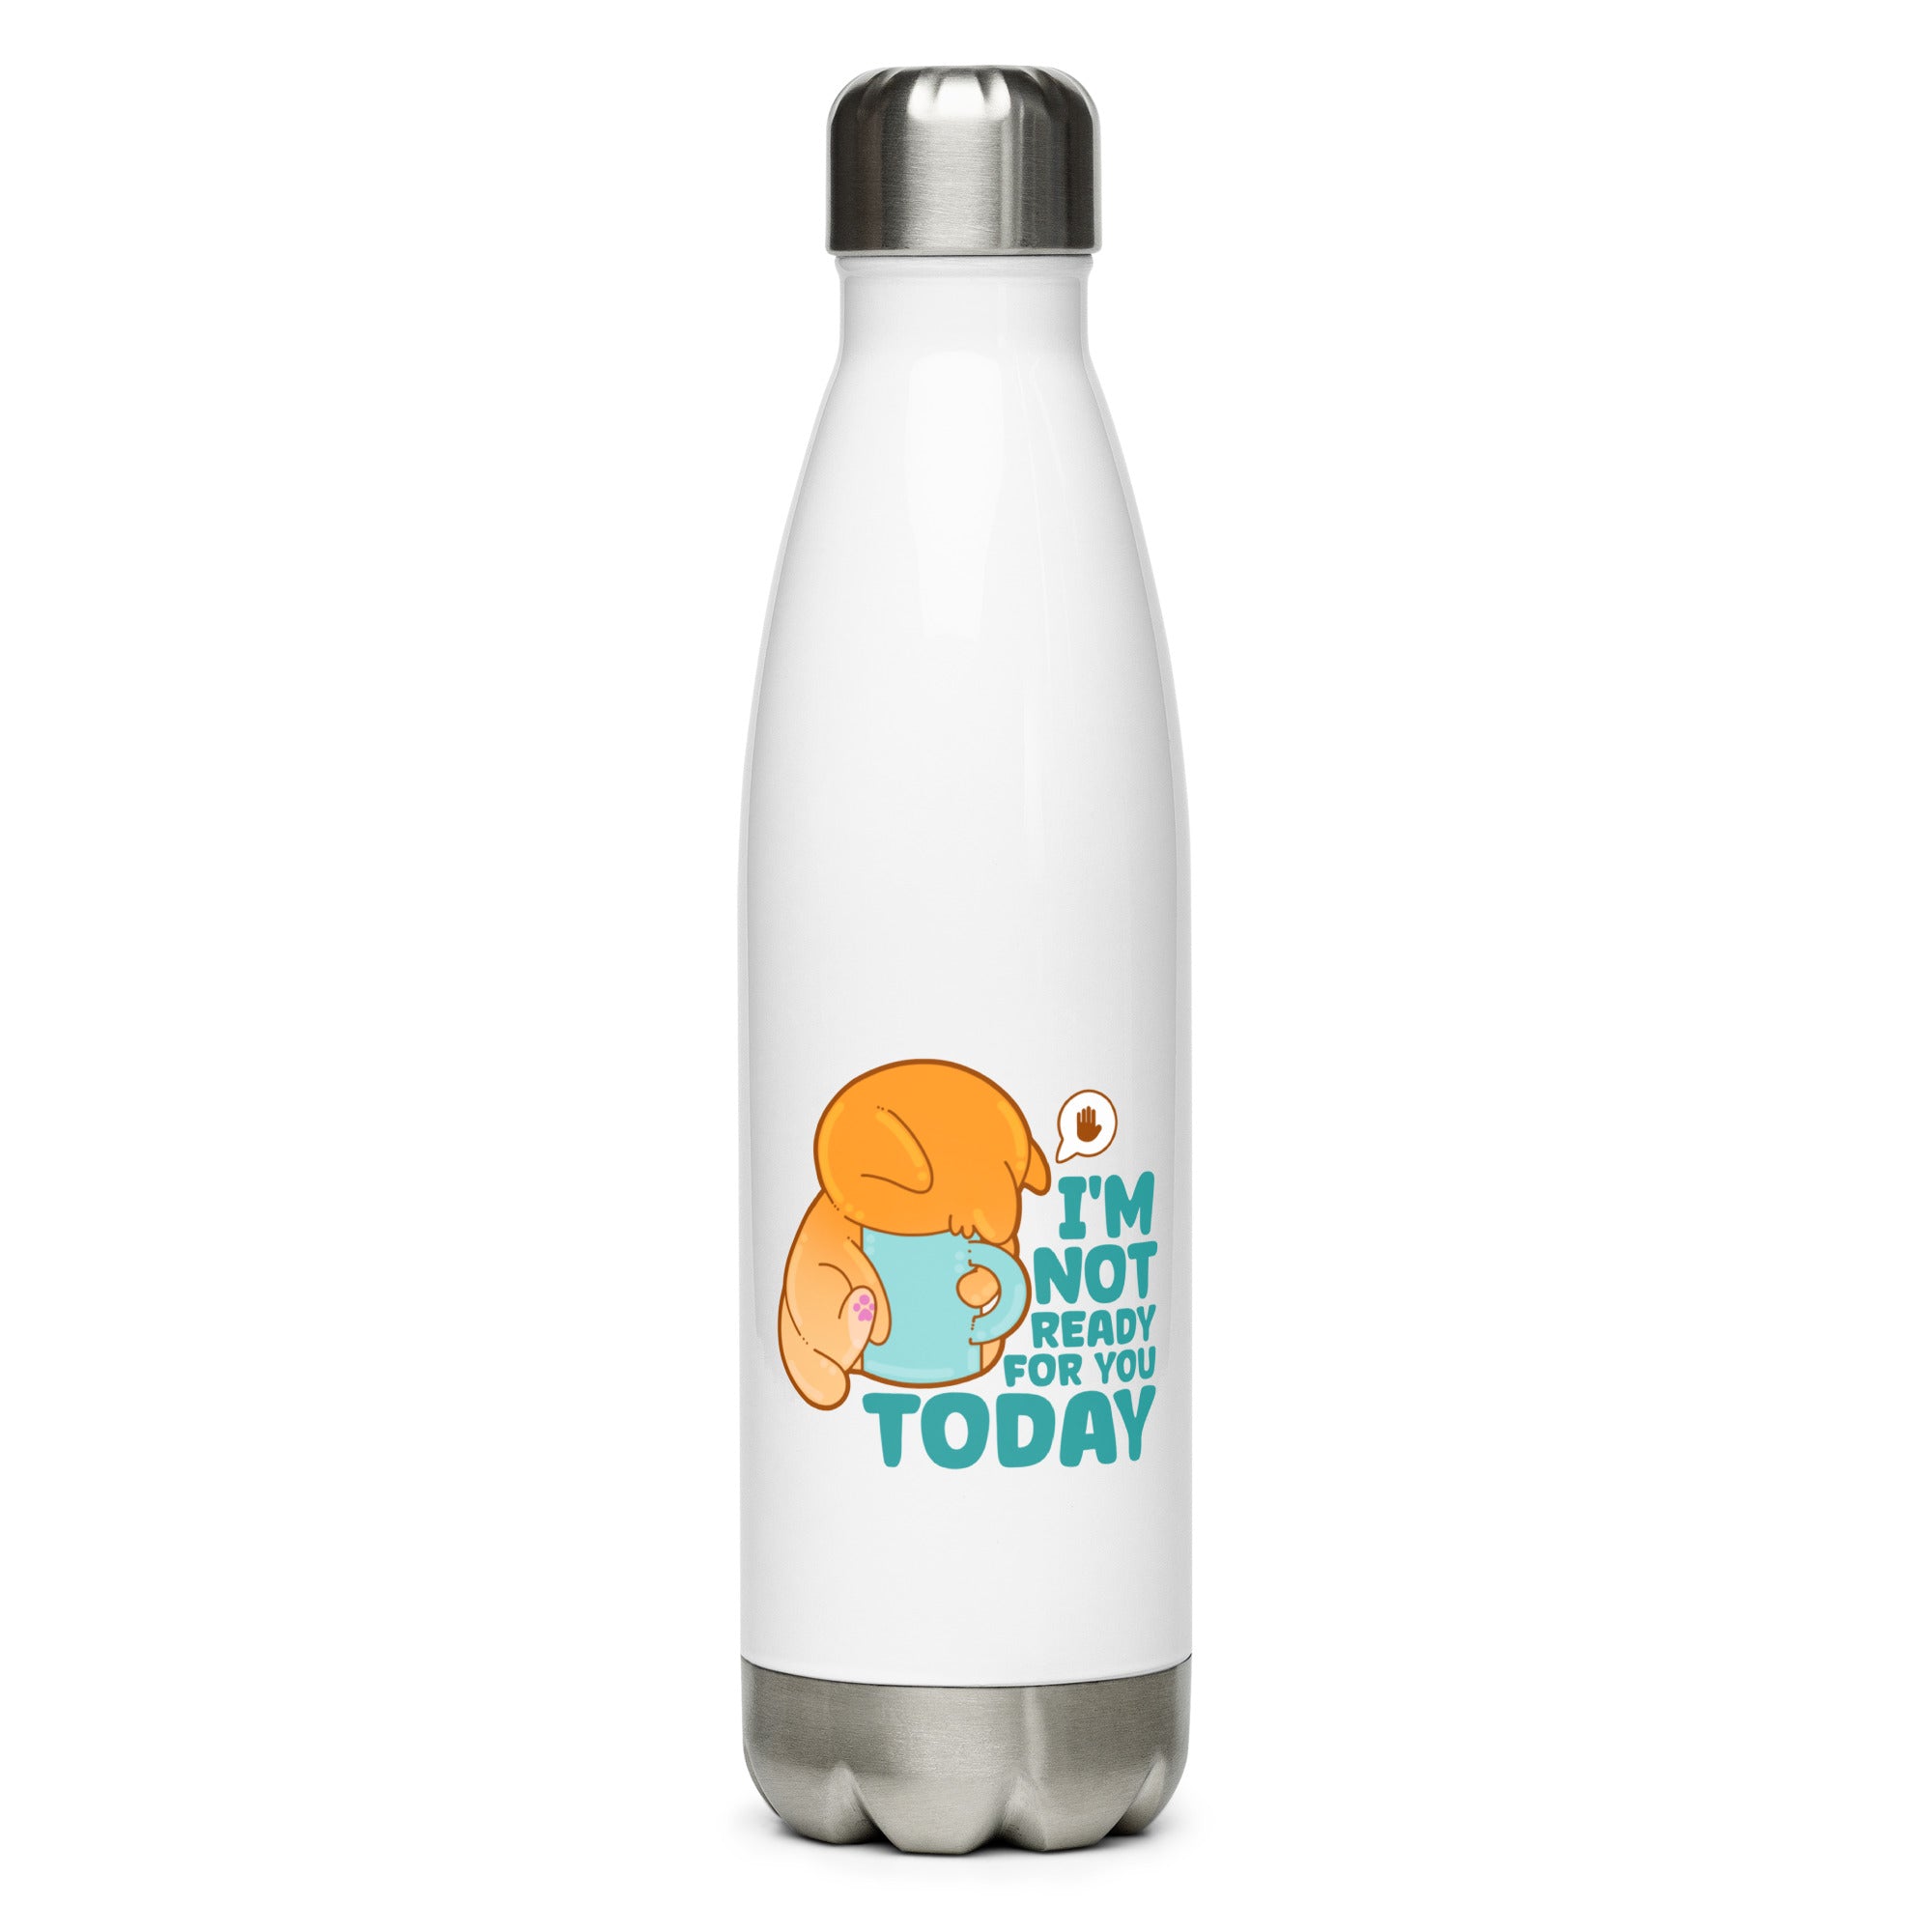 IM. IT READY FOR YOU TODAY - Stainless Steel Water Bottle - ChubbleGumLLC